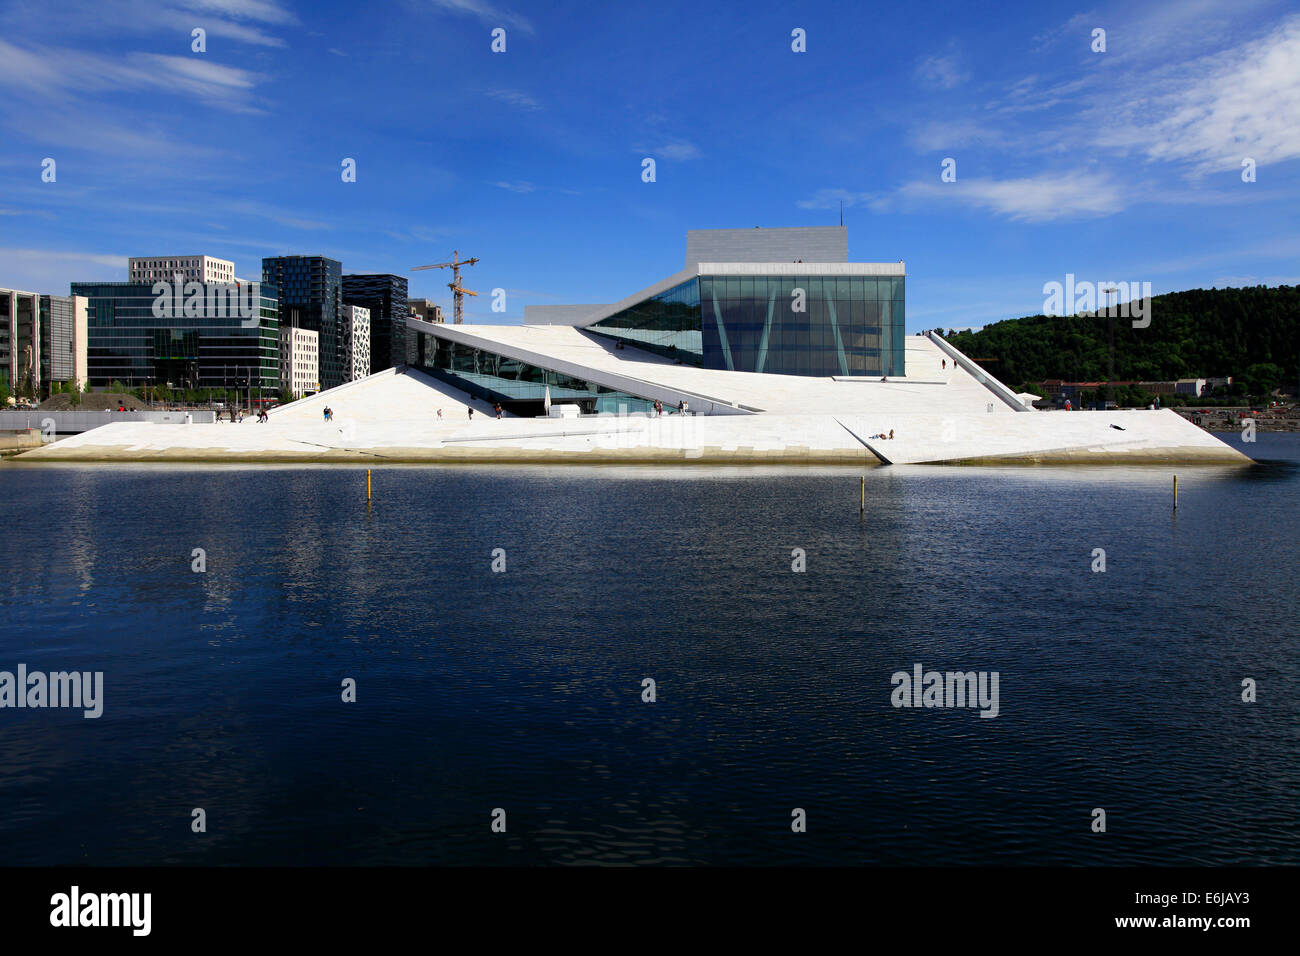 The new Oslo Opera House opened in 2008 and it is the largest Norwegian culture project. The building is modeled on a drifting iceberg. It is 110 m wide, 207 m long. Photo: Klaus Nowottnick Date: June 3, 2014 Stock Photo